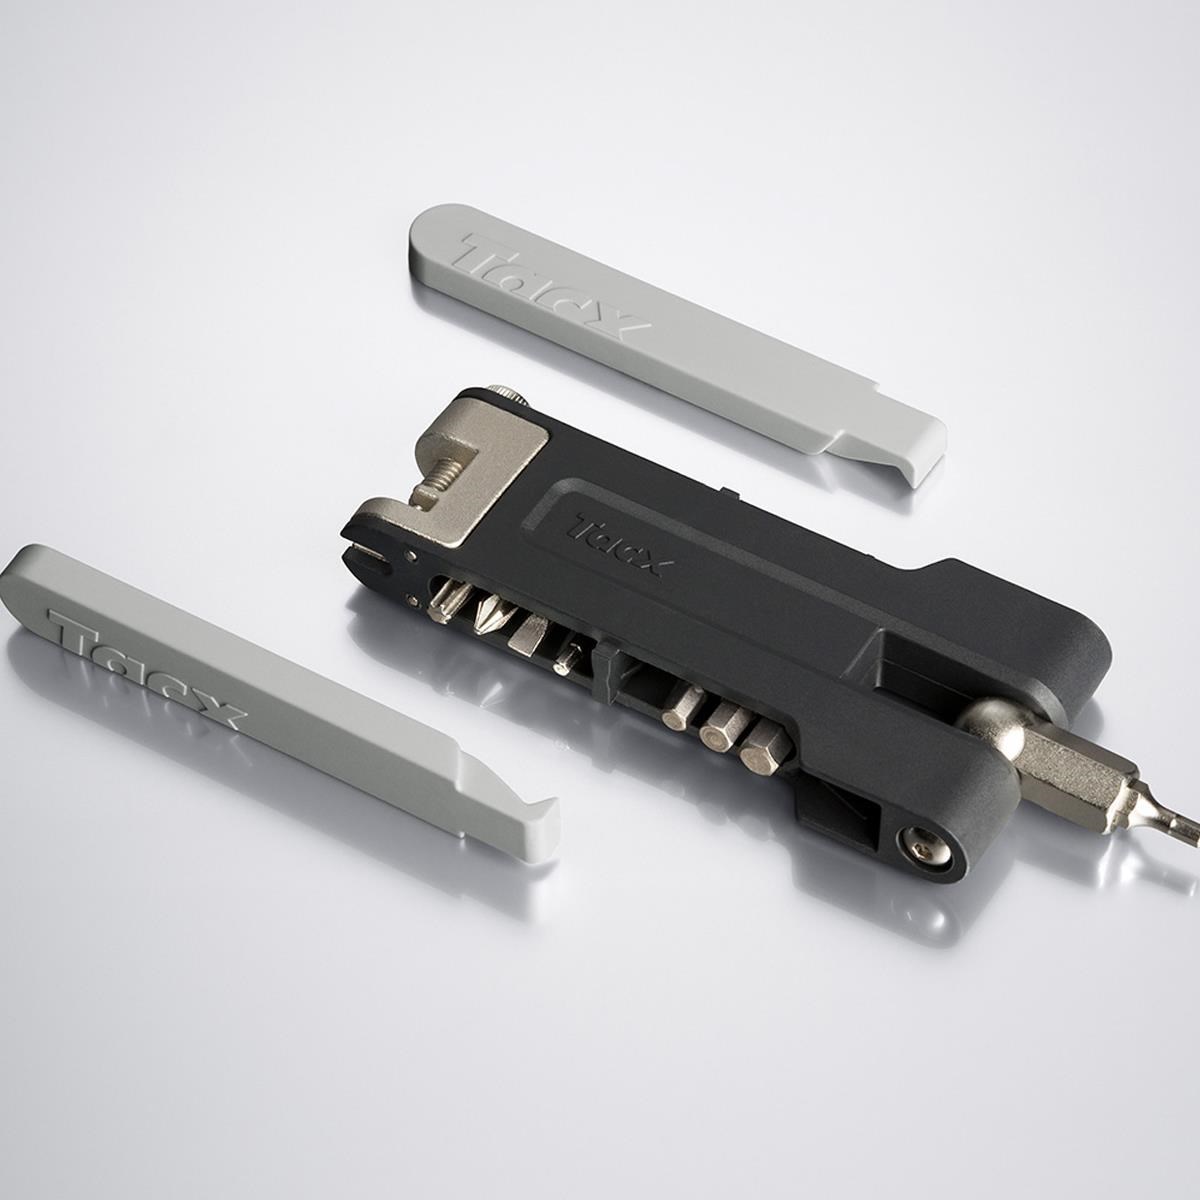 Tacx Tools To Go - Mini Allen Key Set & Chain Rivet Extractor product image